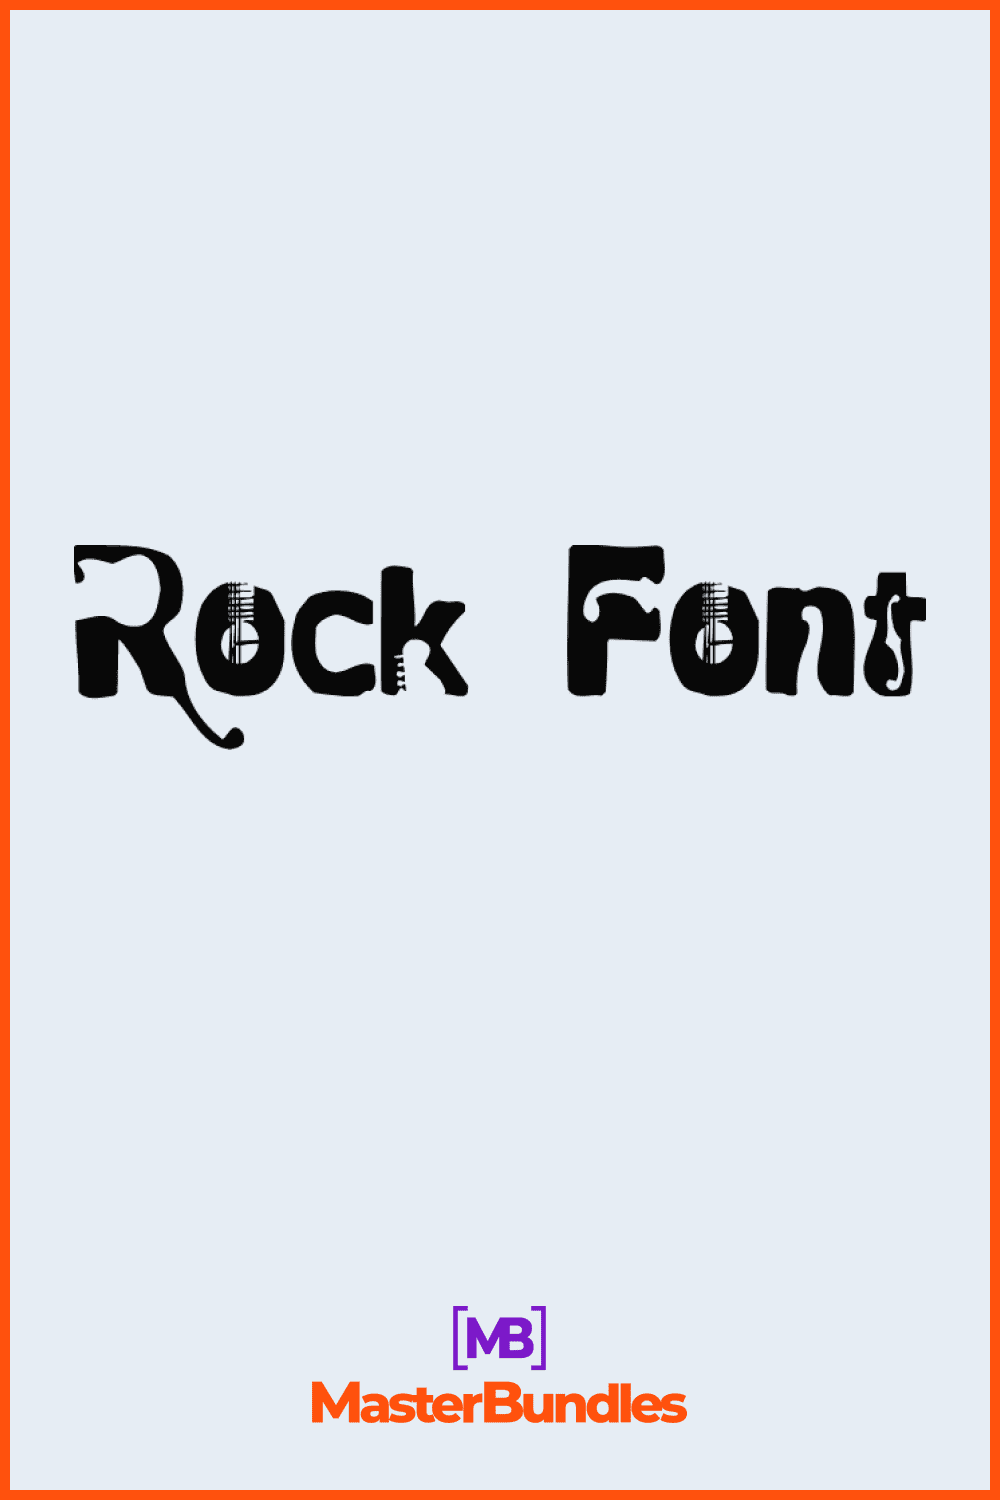 This font is special for rock topic.